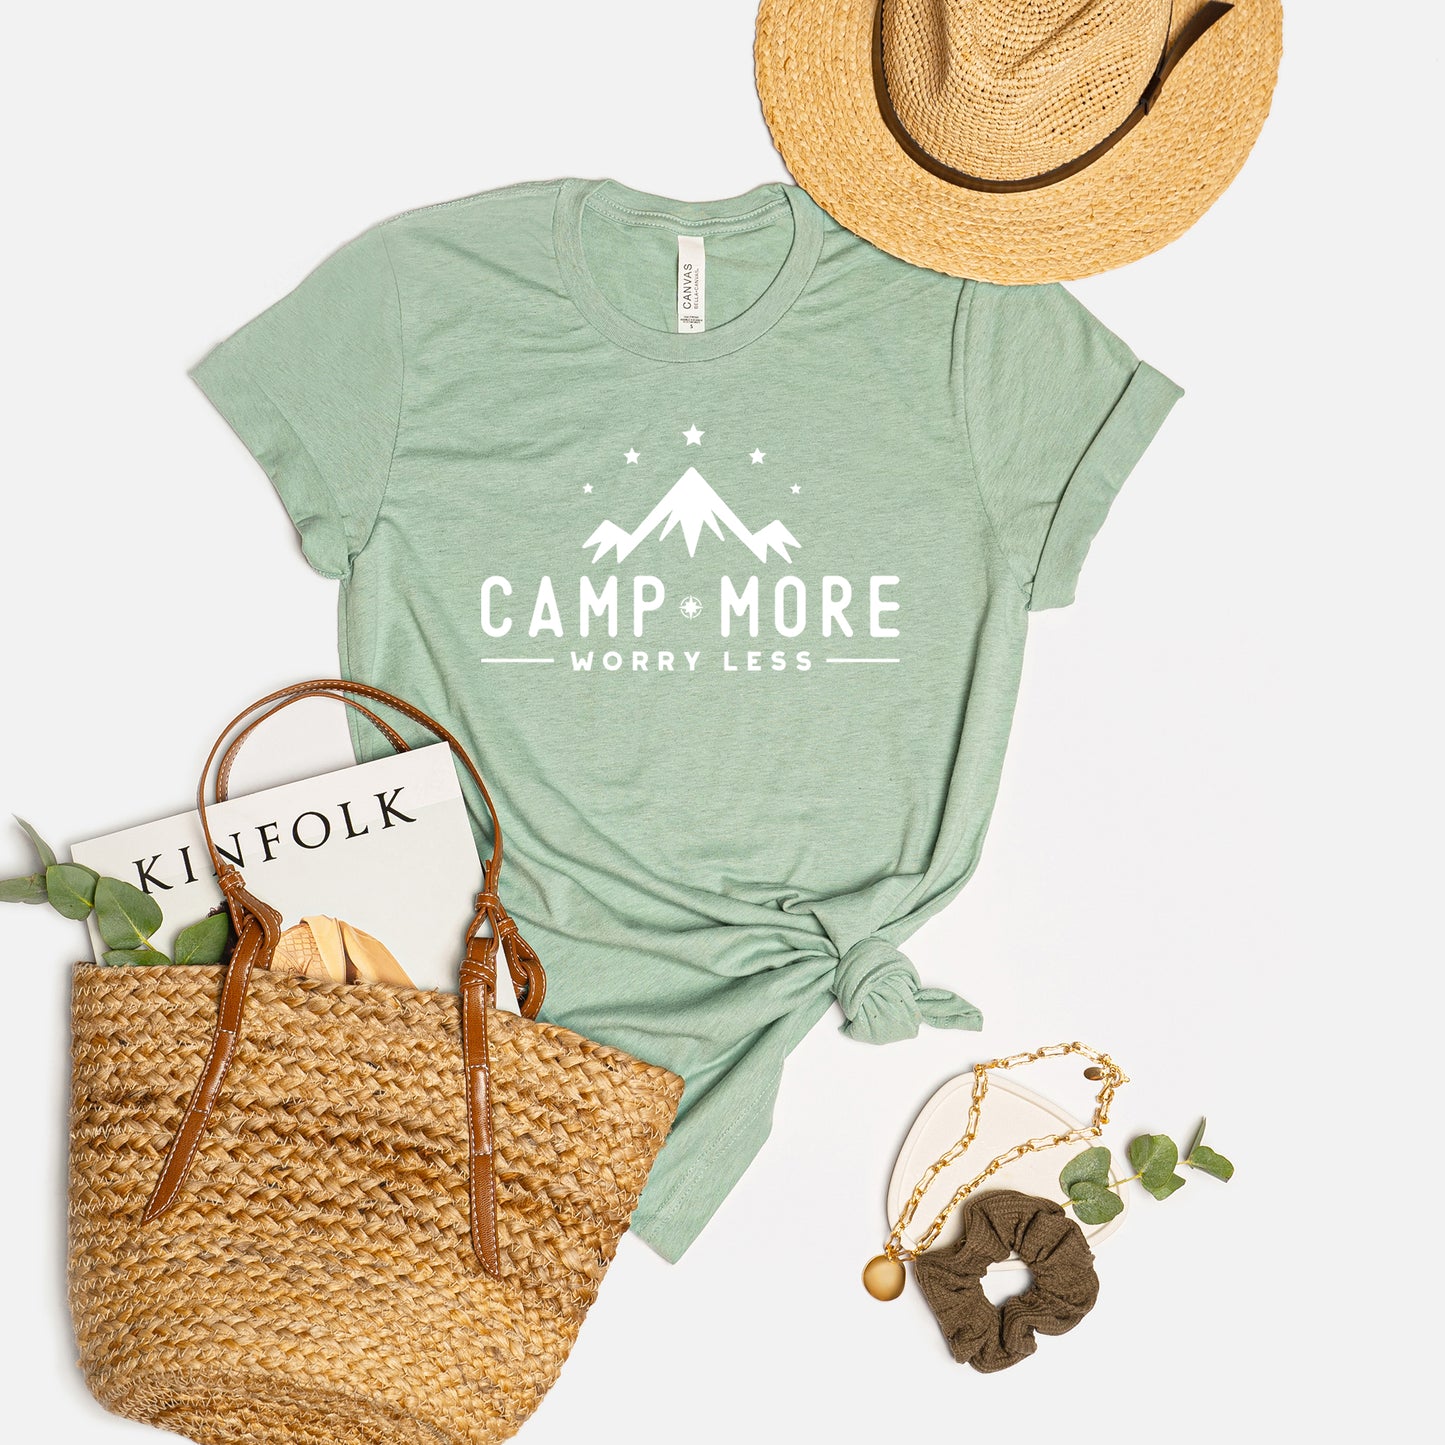 Camp More Worry Less Mountains | Short Sleeve Graphic Tee